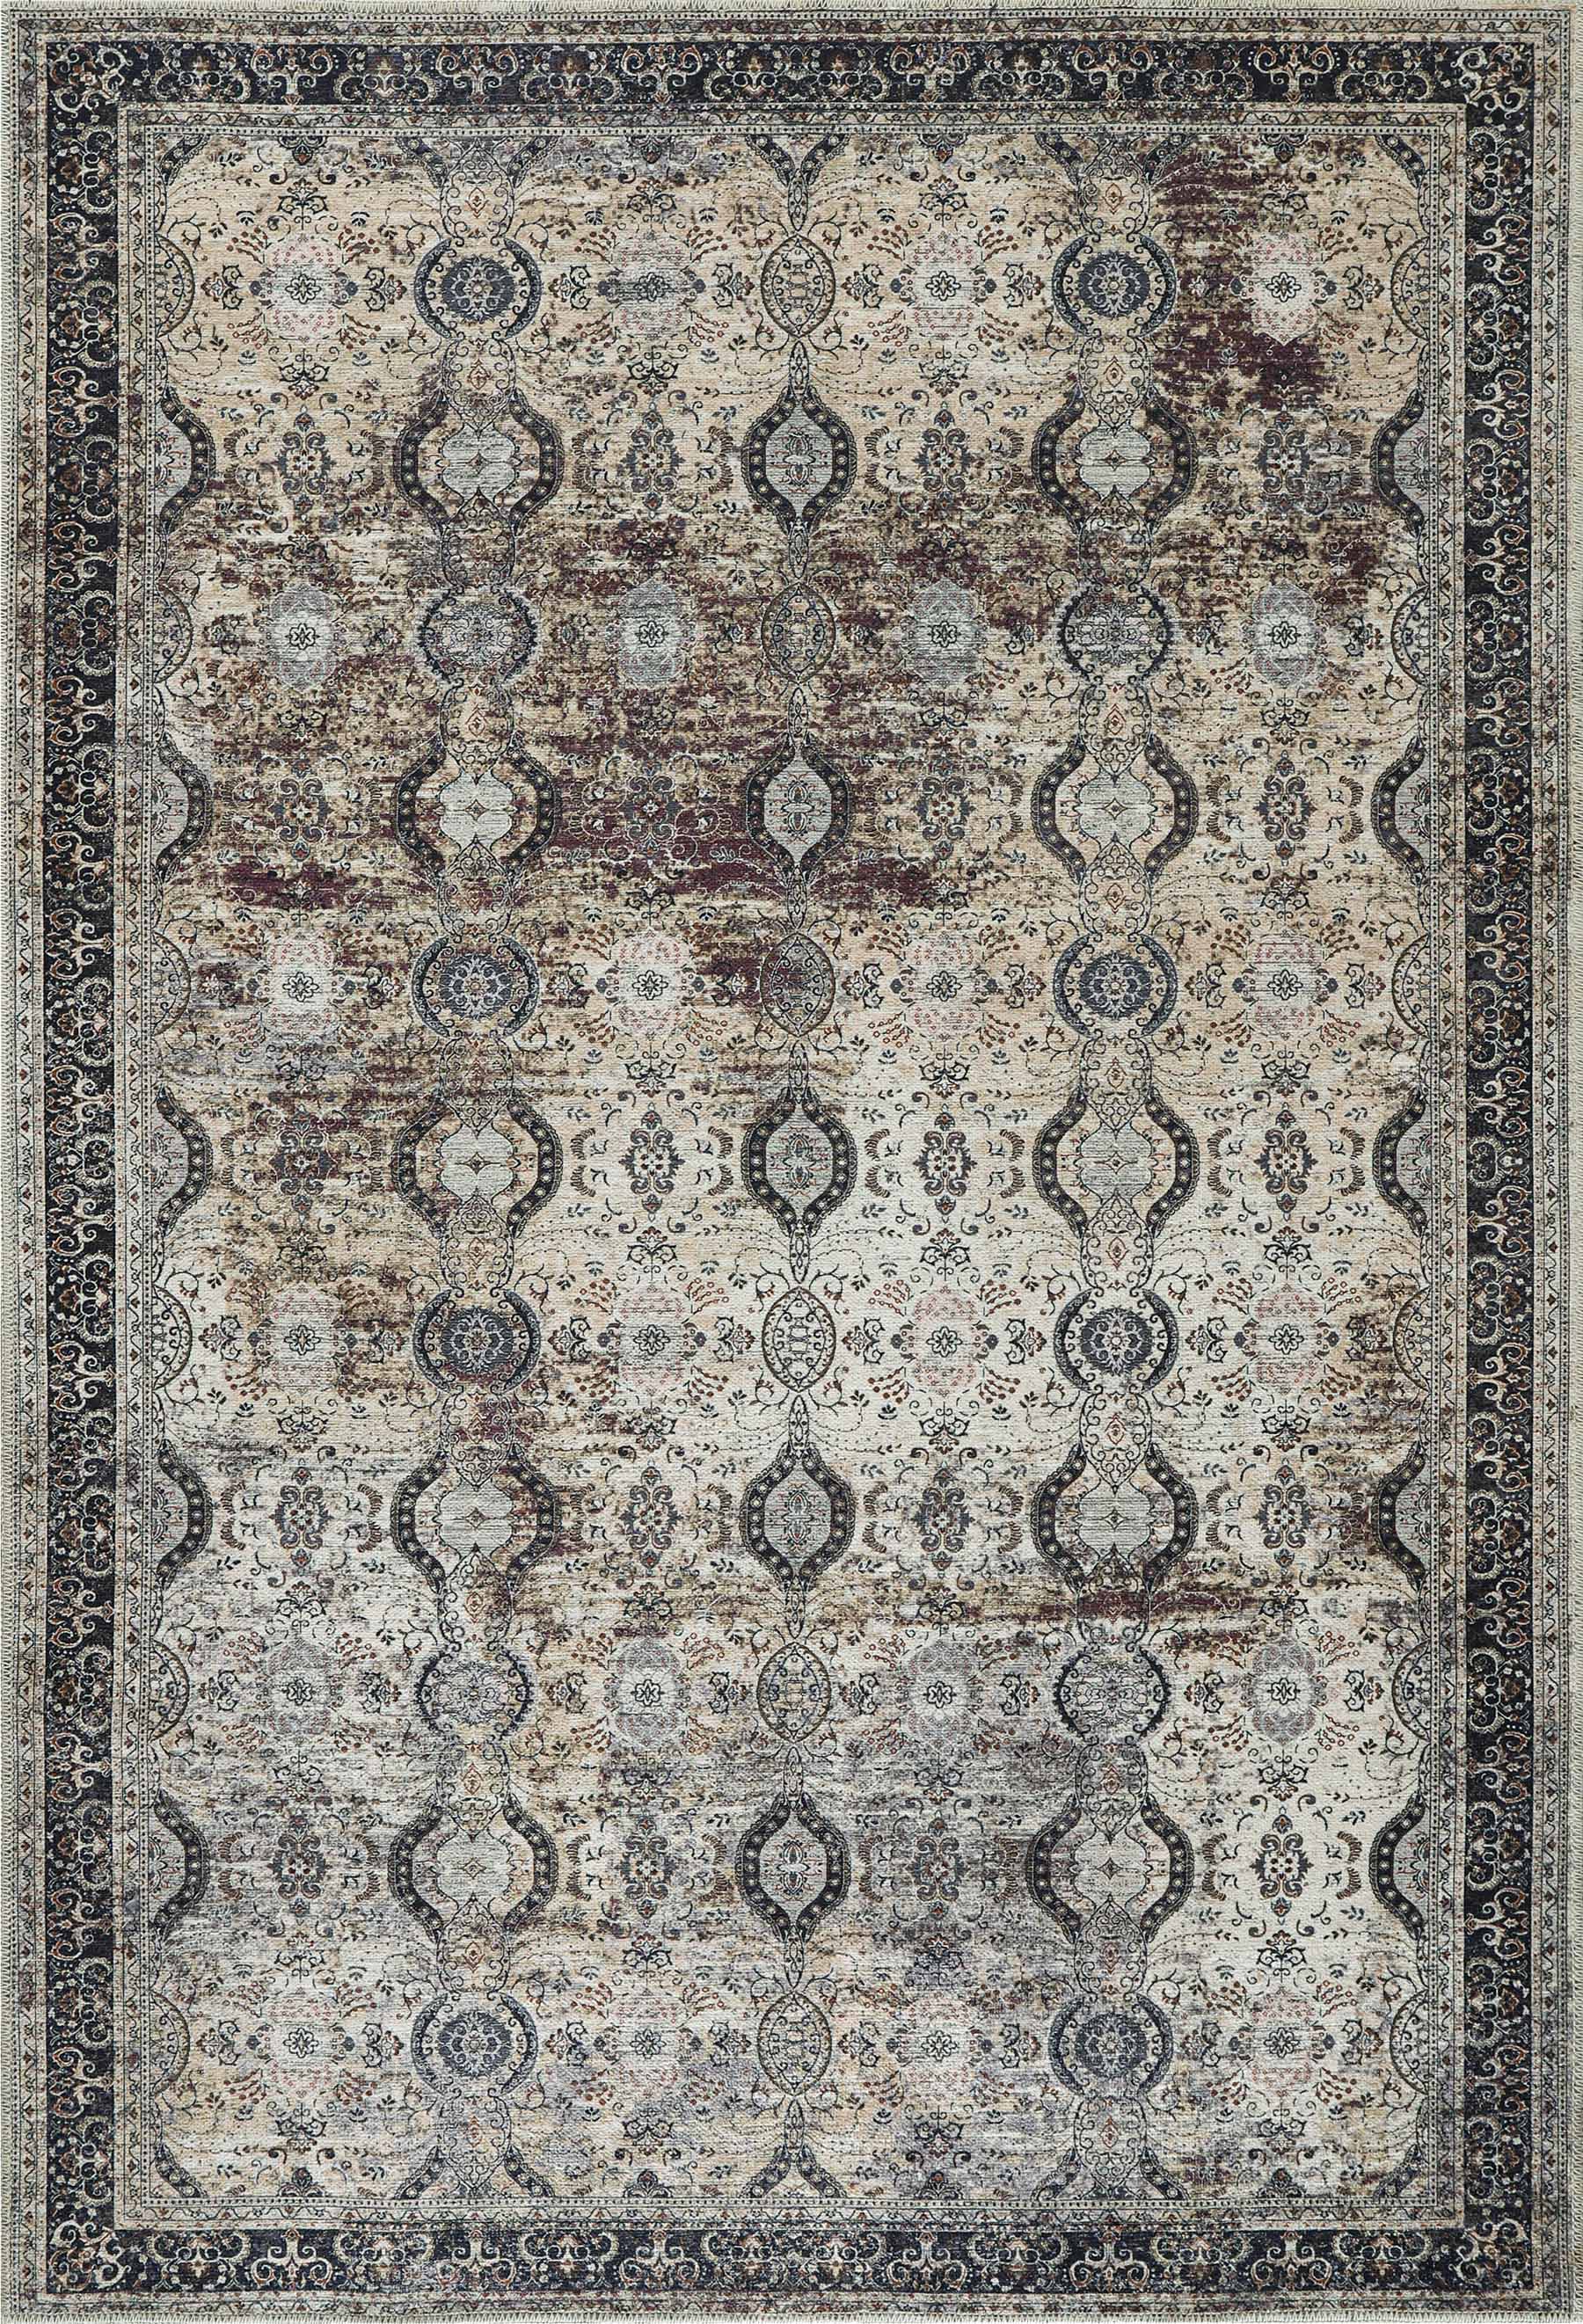 Dropship CAMILSON Machine Washable Rug With Non Slip Backing For